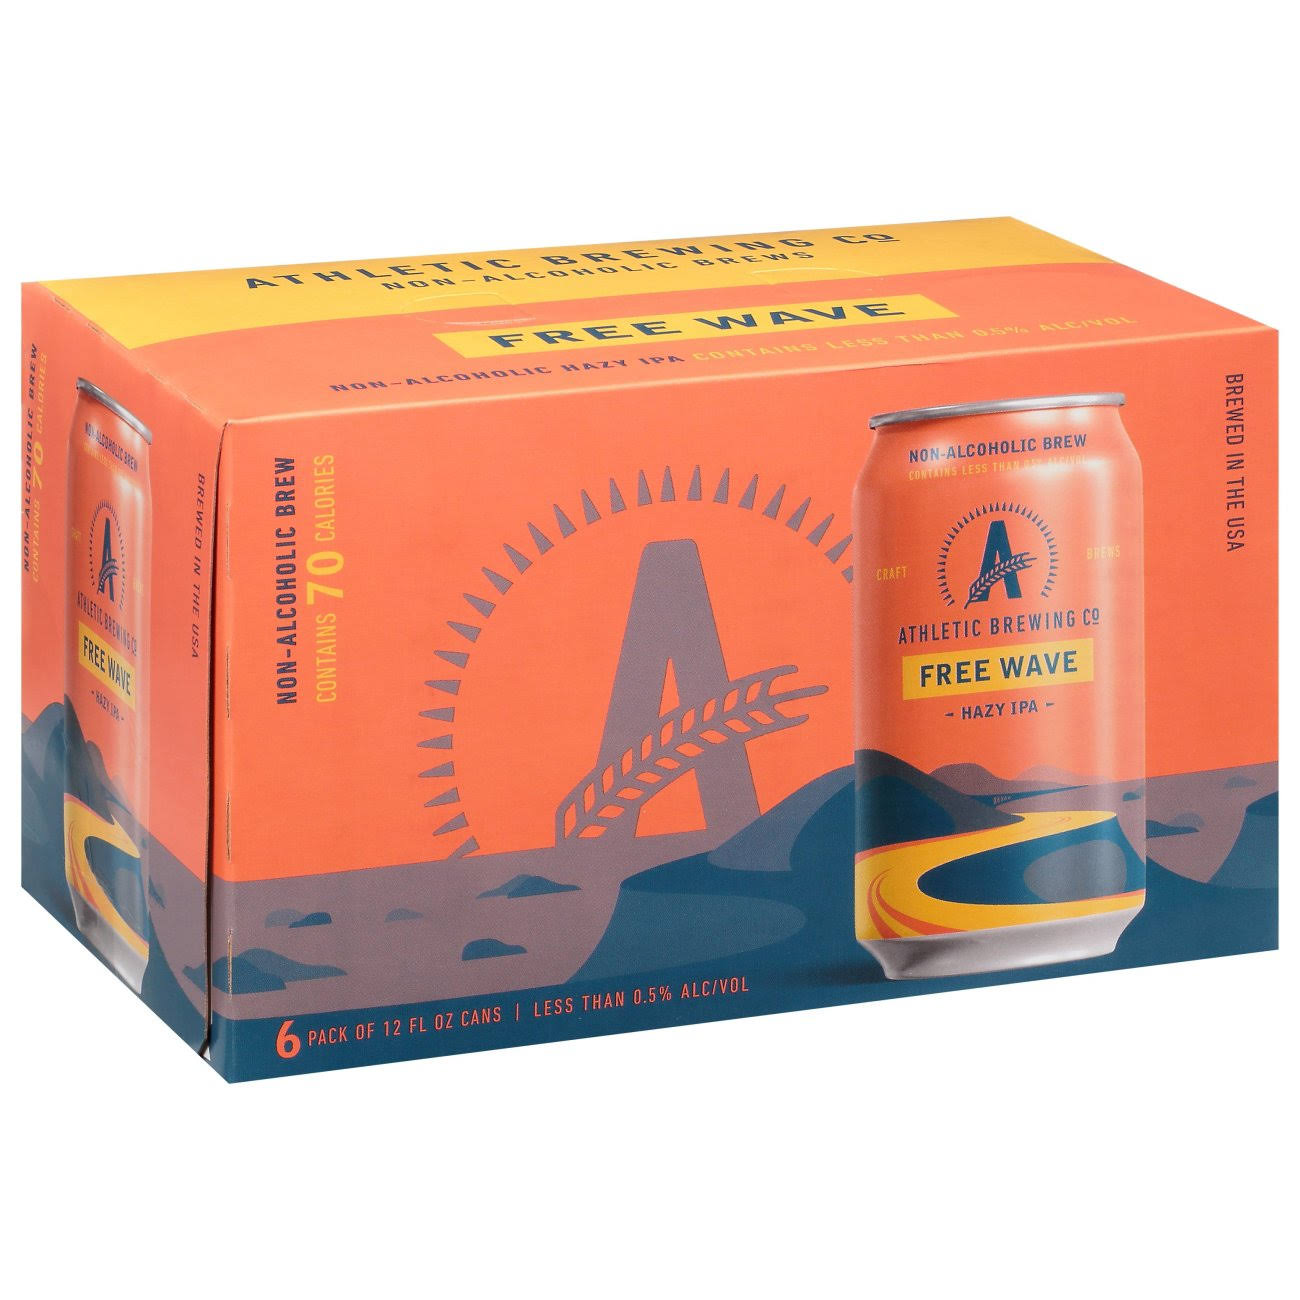 Athletic Brewing Co Beer, Hazy IPA, Free Wave, 6 Pack - 6 pack, 12 fl oz cans